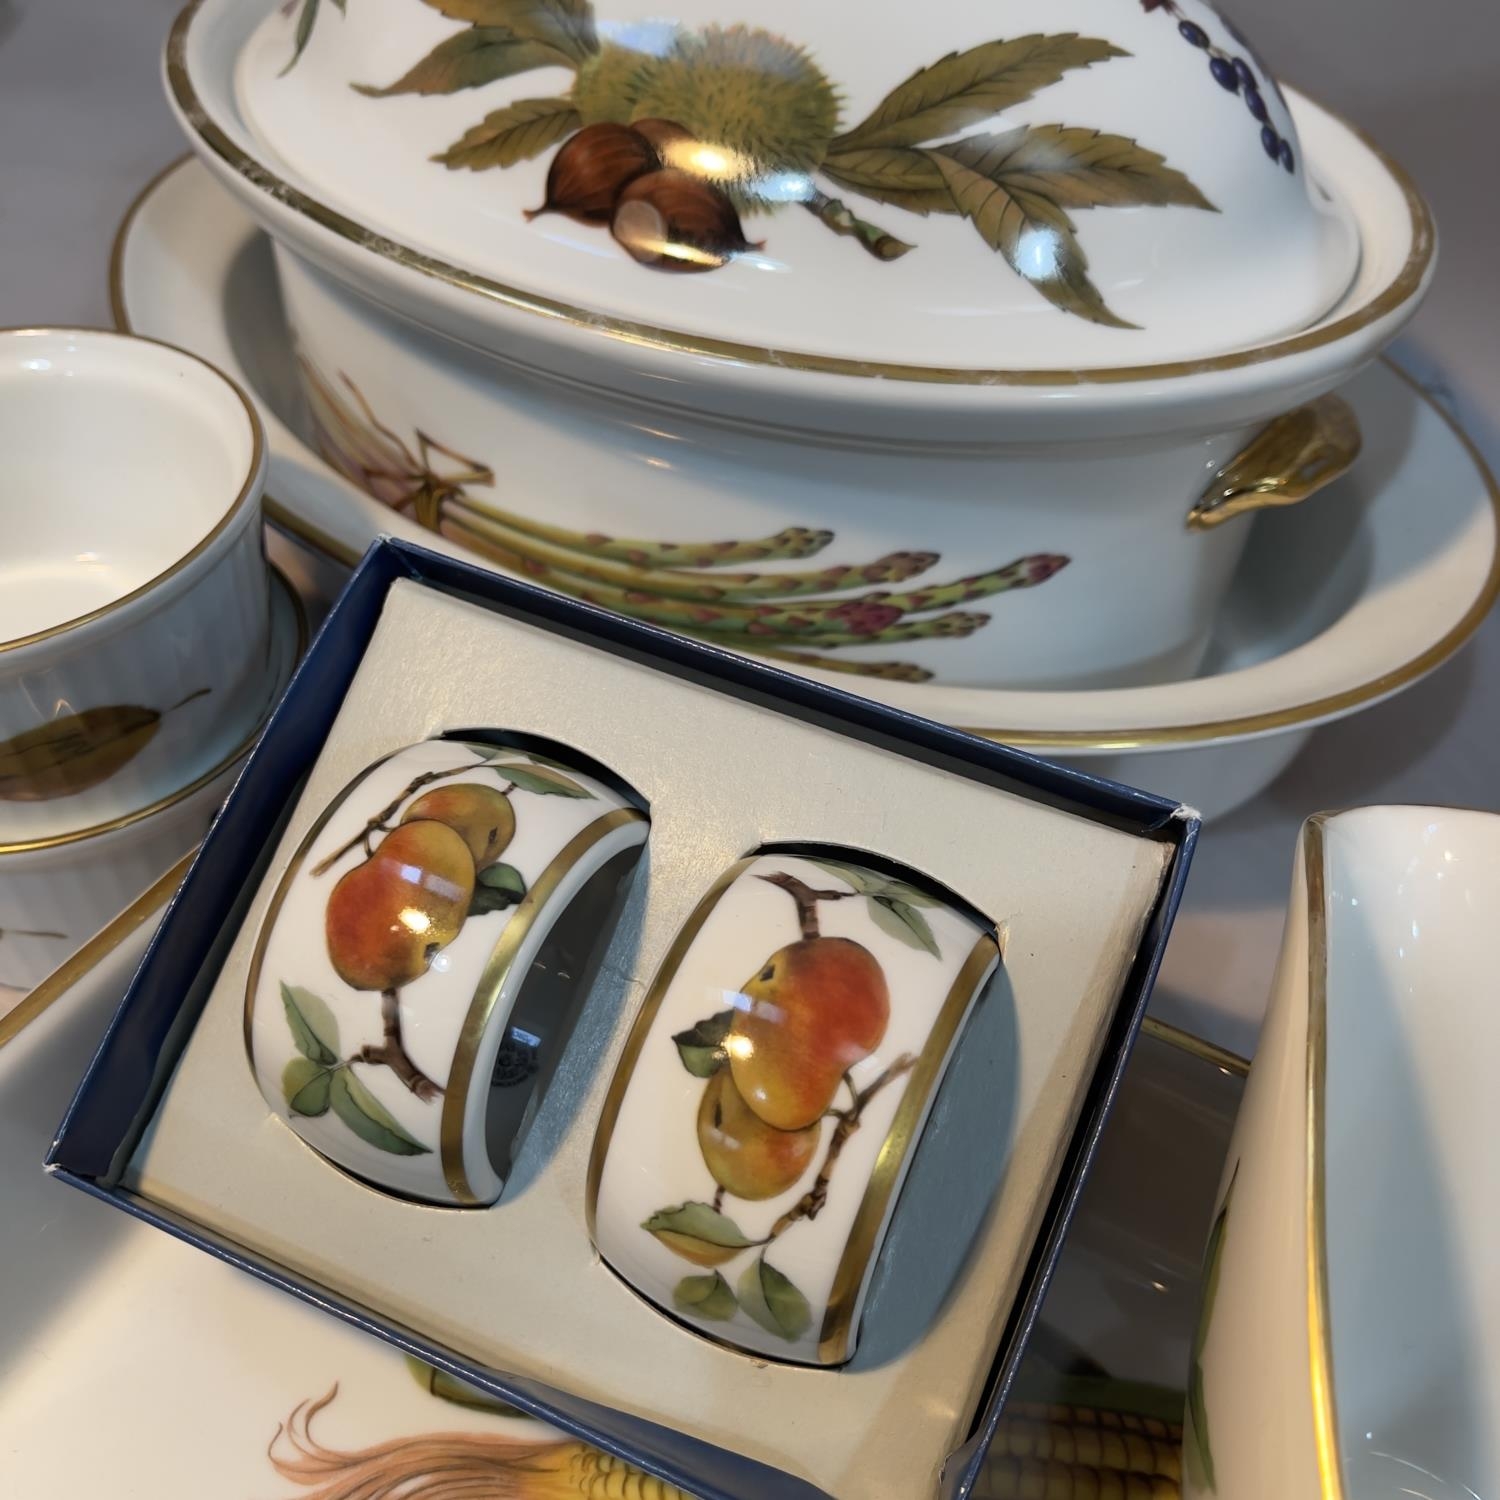 A quantity of Royal Worcester Evesham oven to table ware including oval tureens and covers, - Image 5 of 6